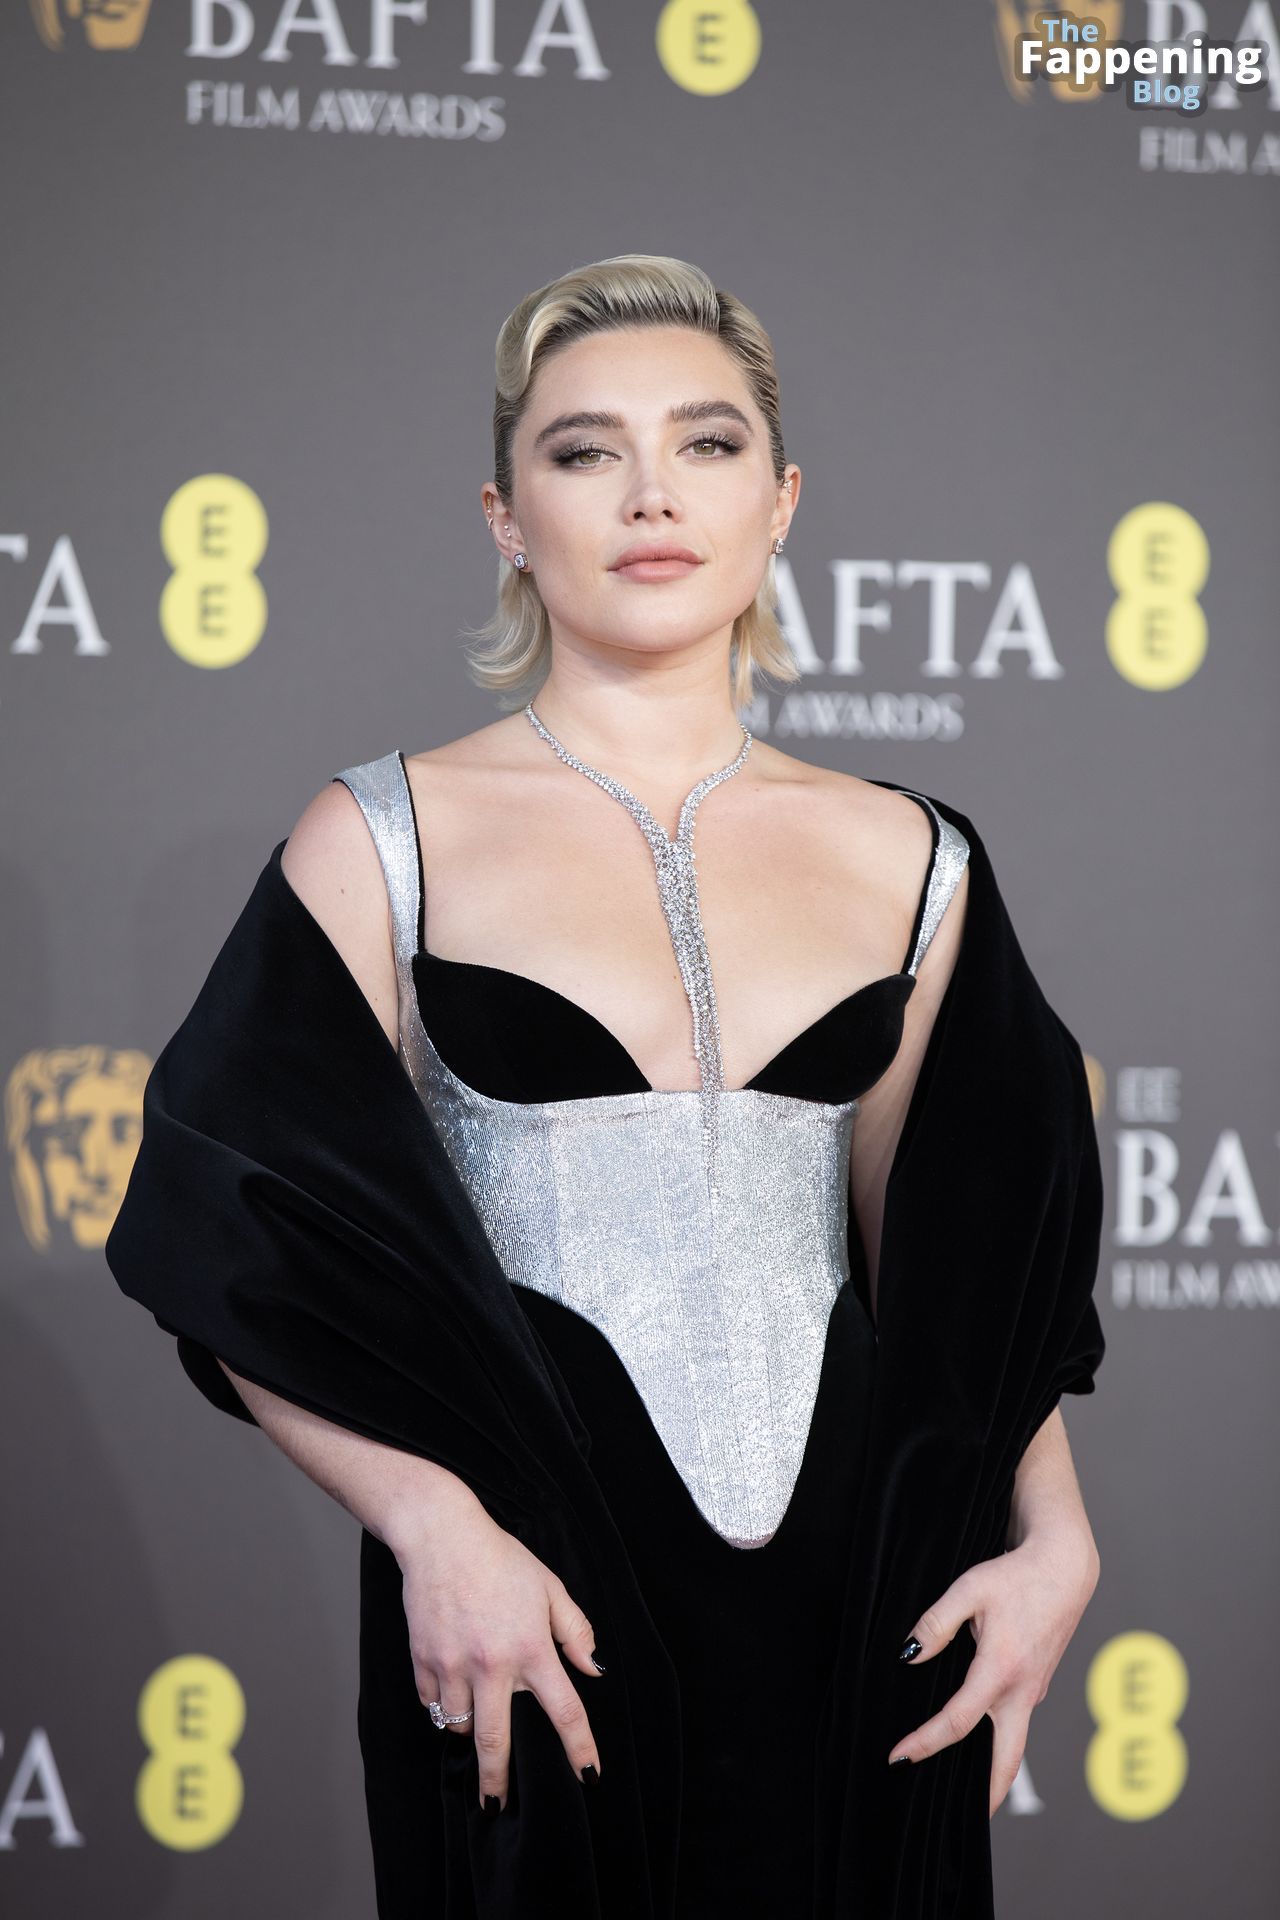 Florence-Pugh-Sexy-66-The-Fappening-Blog-1.jpg